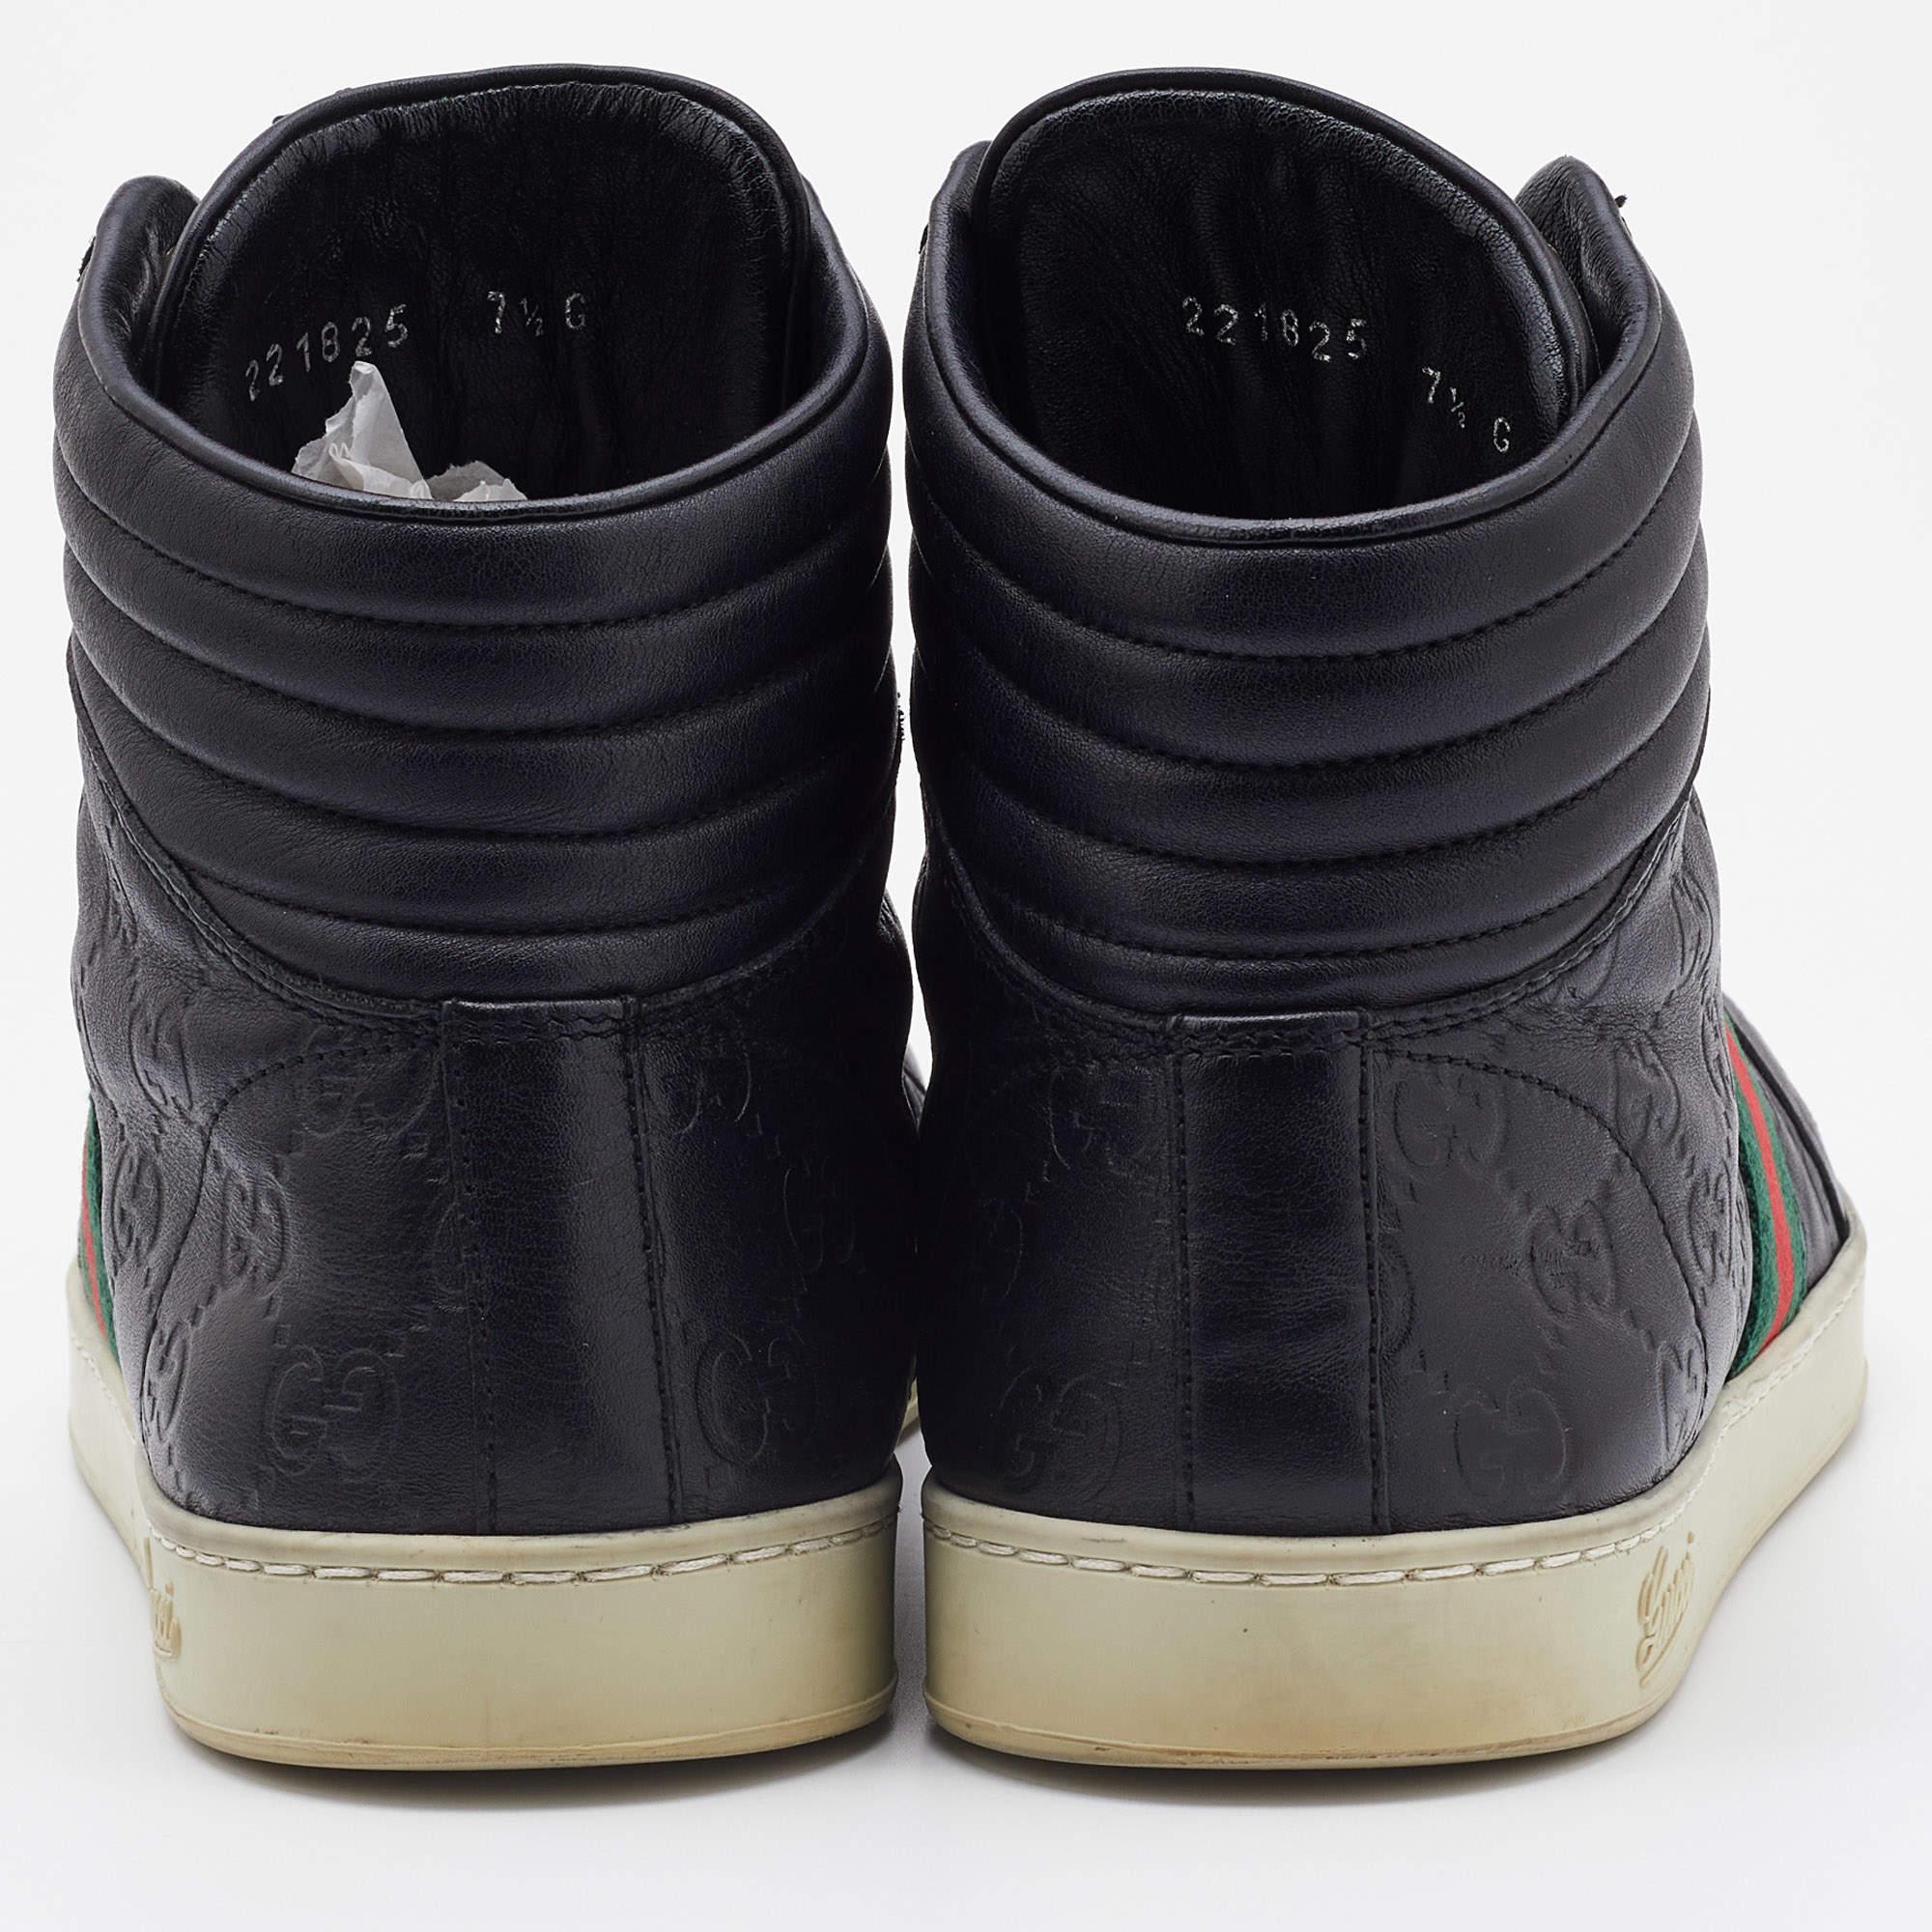 Gucci Black Guccissima Leather Web Detail High Top Sneakers Size 41.5 For Sale 2